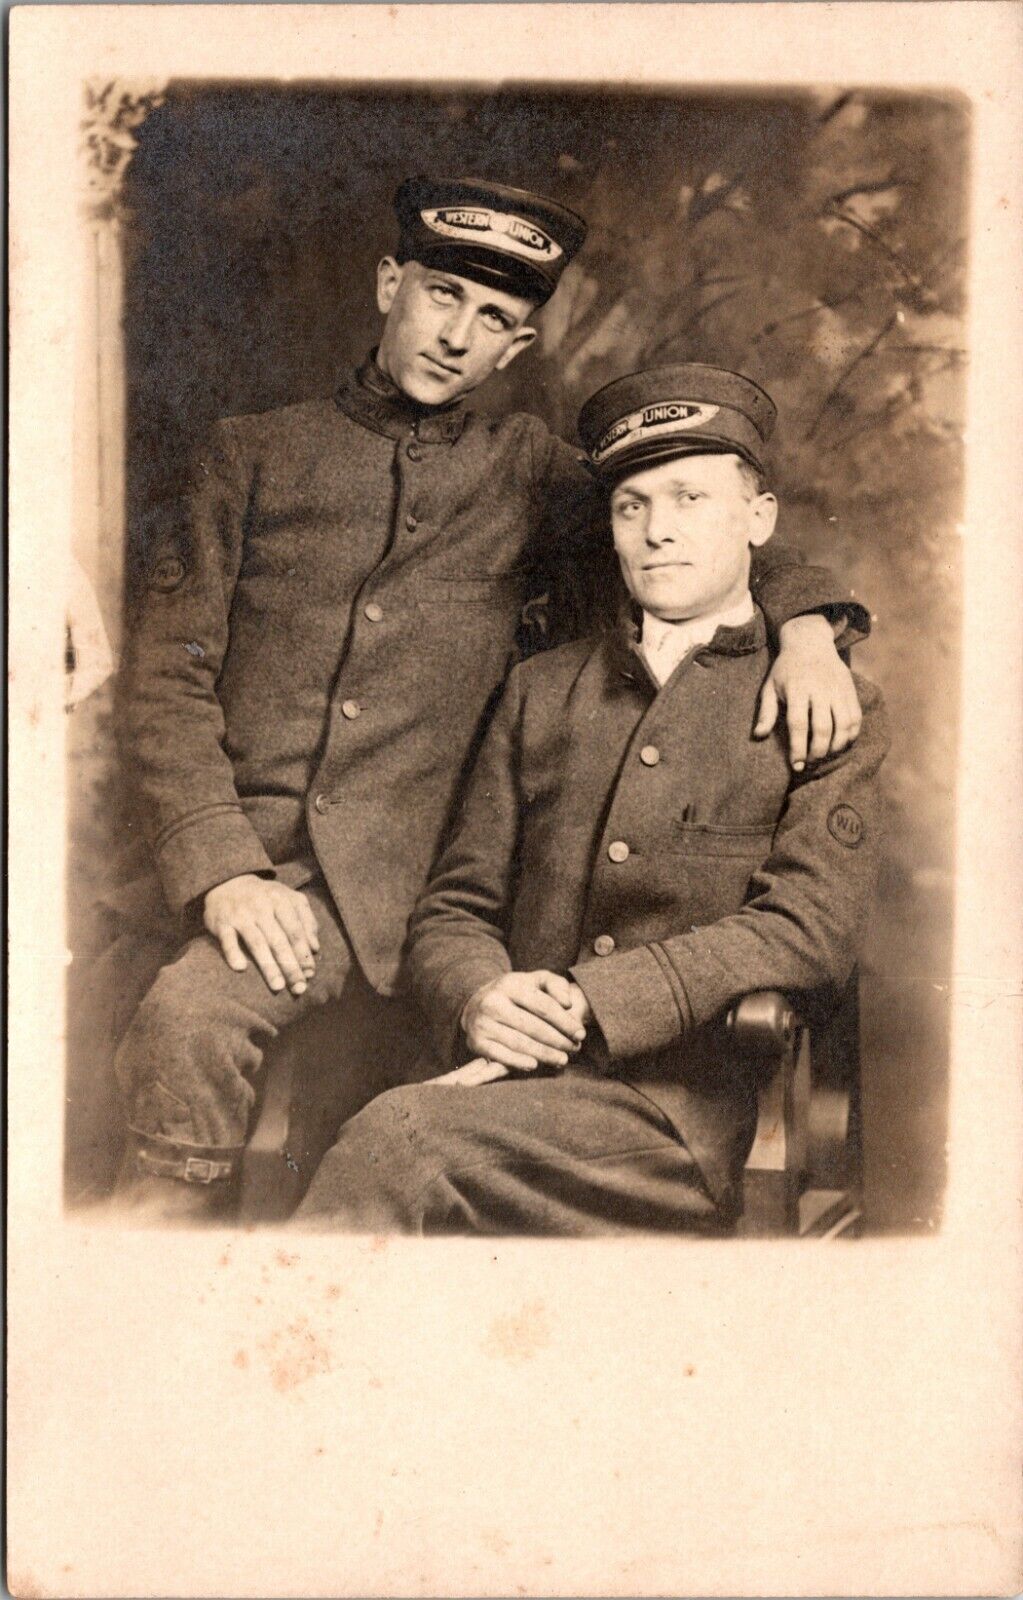 TWO AFFECTIONATE MEN IN WESTERN UNION UNIFORMS (SWEET IMAGE)